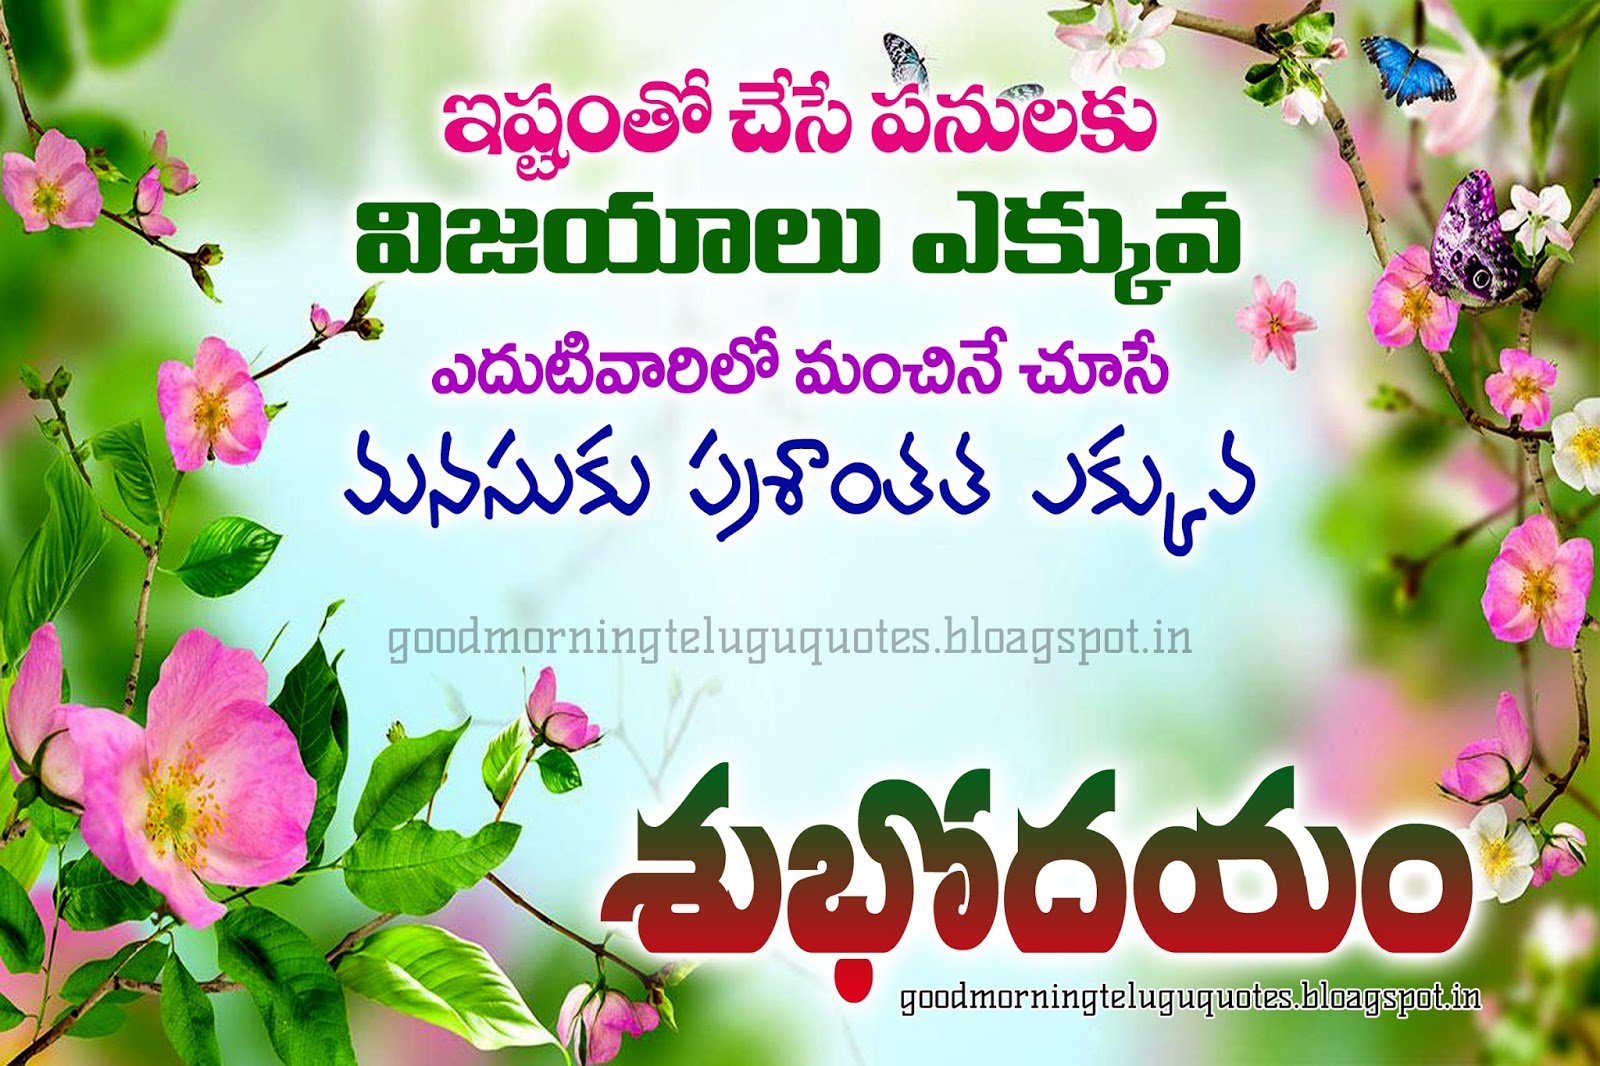 Best Good Morning Telugu Quotes HD Wallpapers Nice Life Inspiration Quotes in Telugu